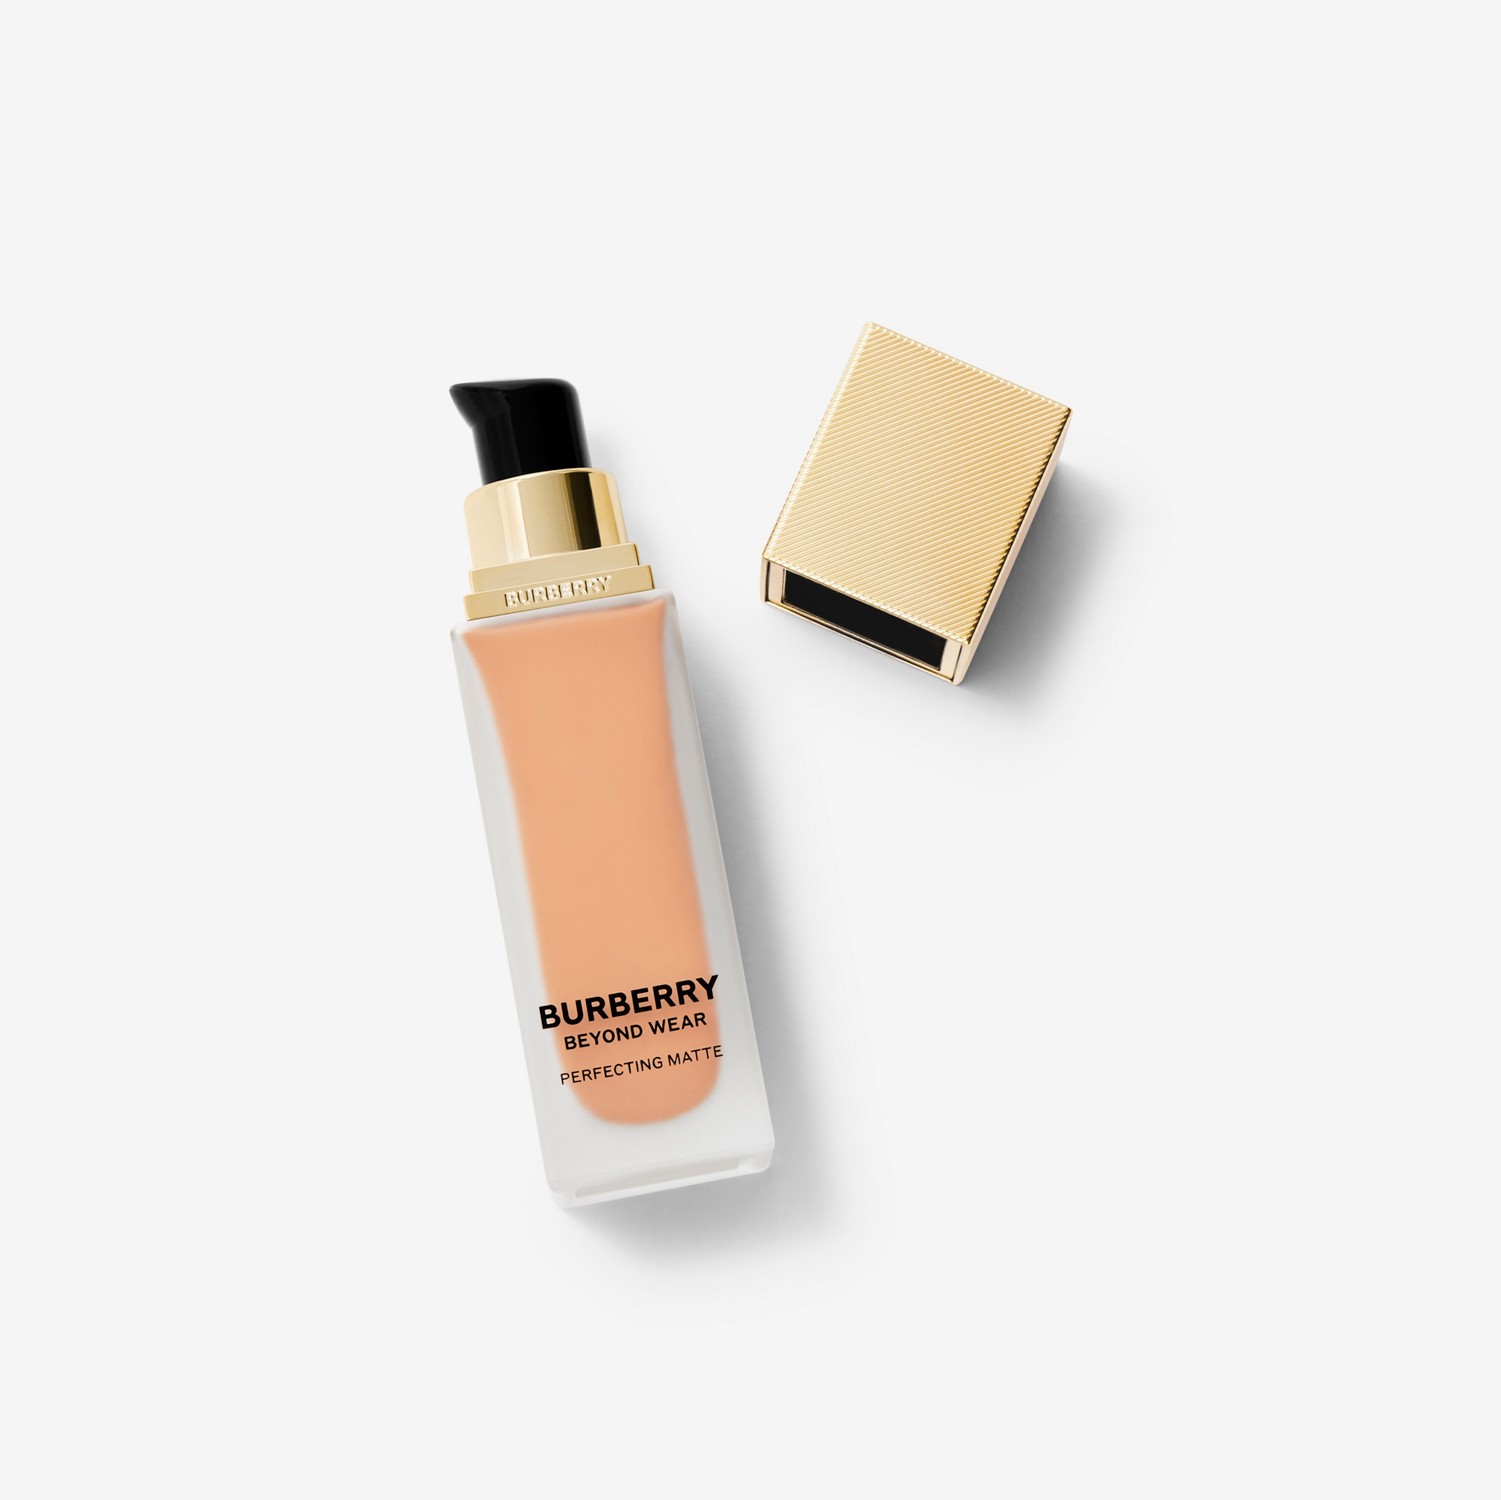 Beyond Wear Perfecting Matte Foundation – 45 Light Neutral - Mujer | Burberry® oficial